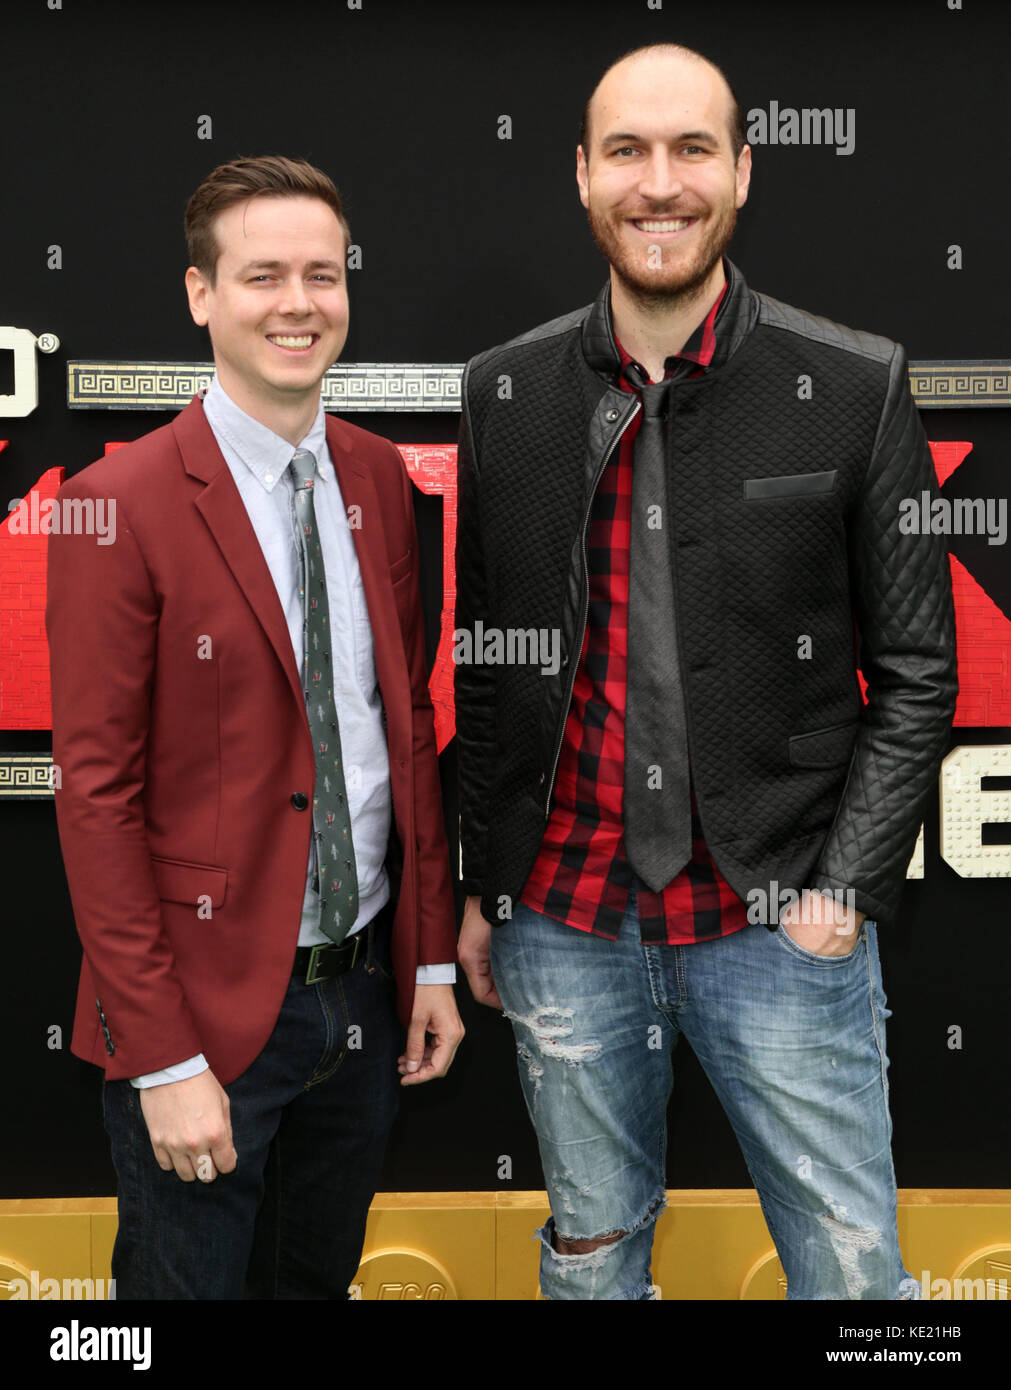 'The LEGO Ninjago Movie' - Premiere  Featuring: Michael Kramer, Jay Vincent Where: Los Angeles, California, United States When: 16 Sep 2017 Credit: Brian To/WENN.com Stock Photo